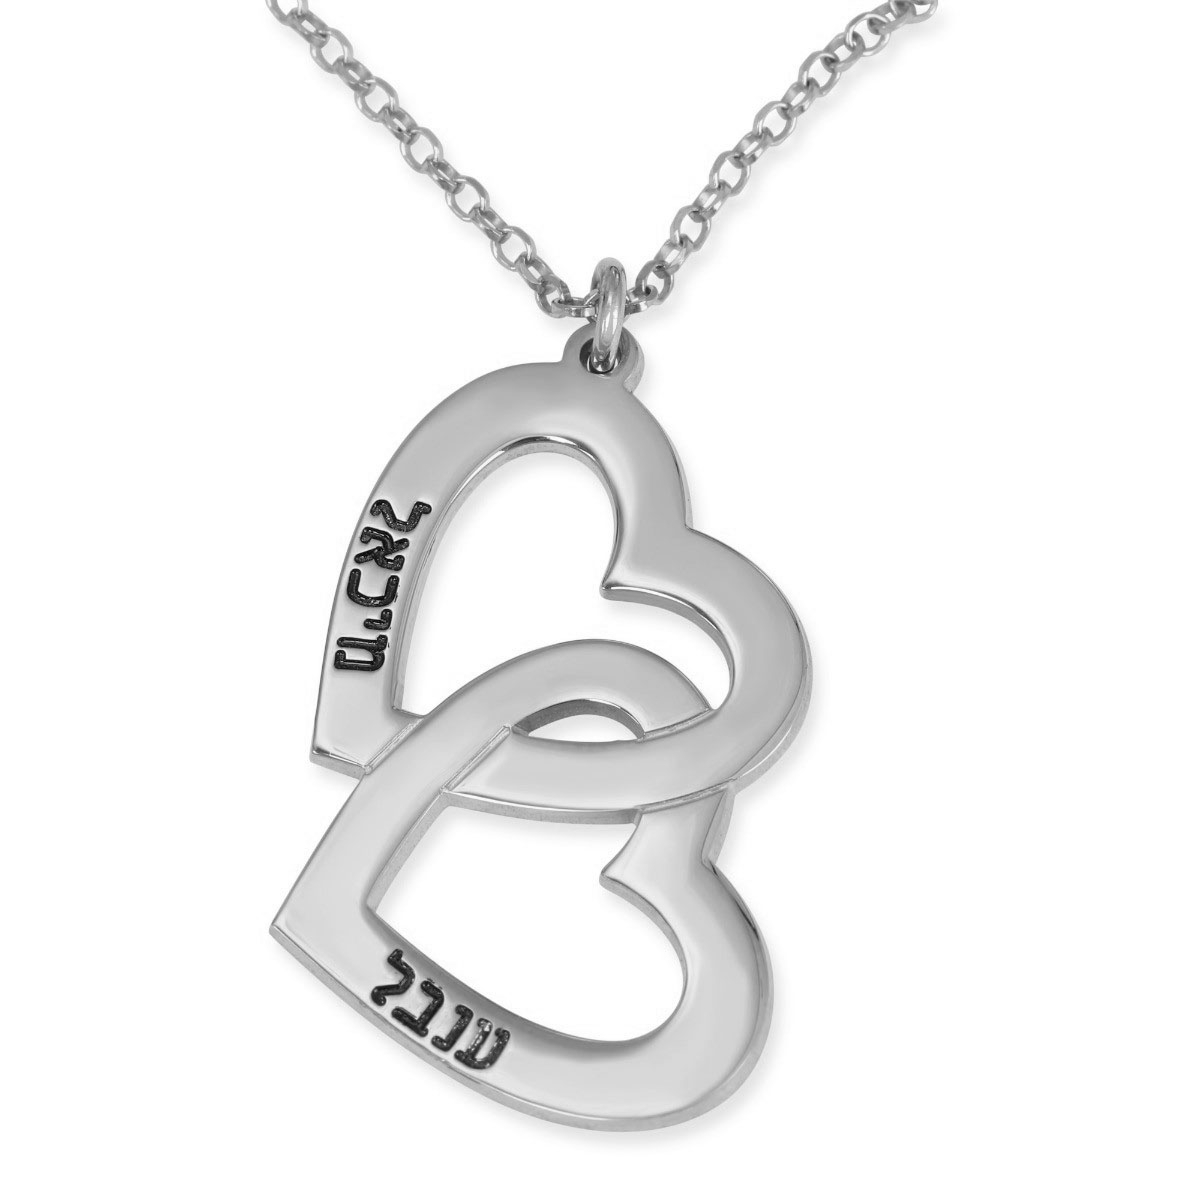 Hebrew Name Necklace Sterling Silver Intertwined Hearts Two Names Hebrew / English Necklace - 1